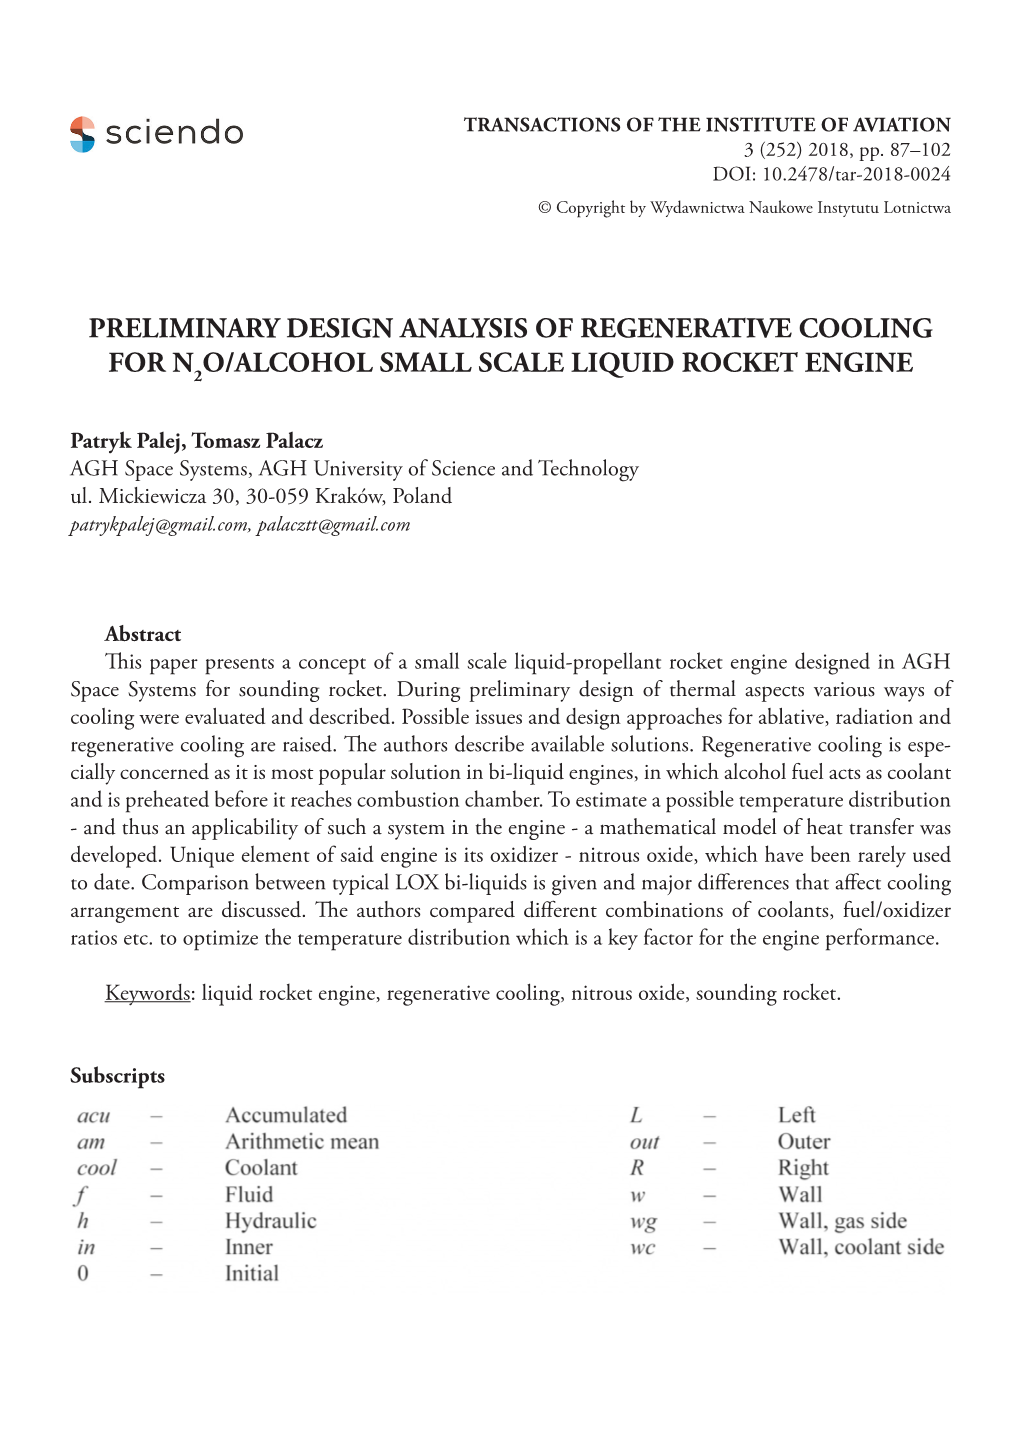 Preliminary Design Analysis of Regenerative Cooling for N